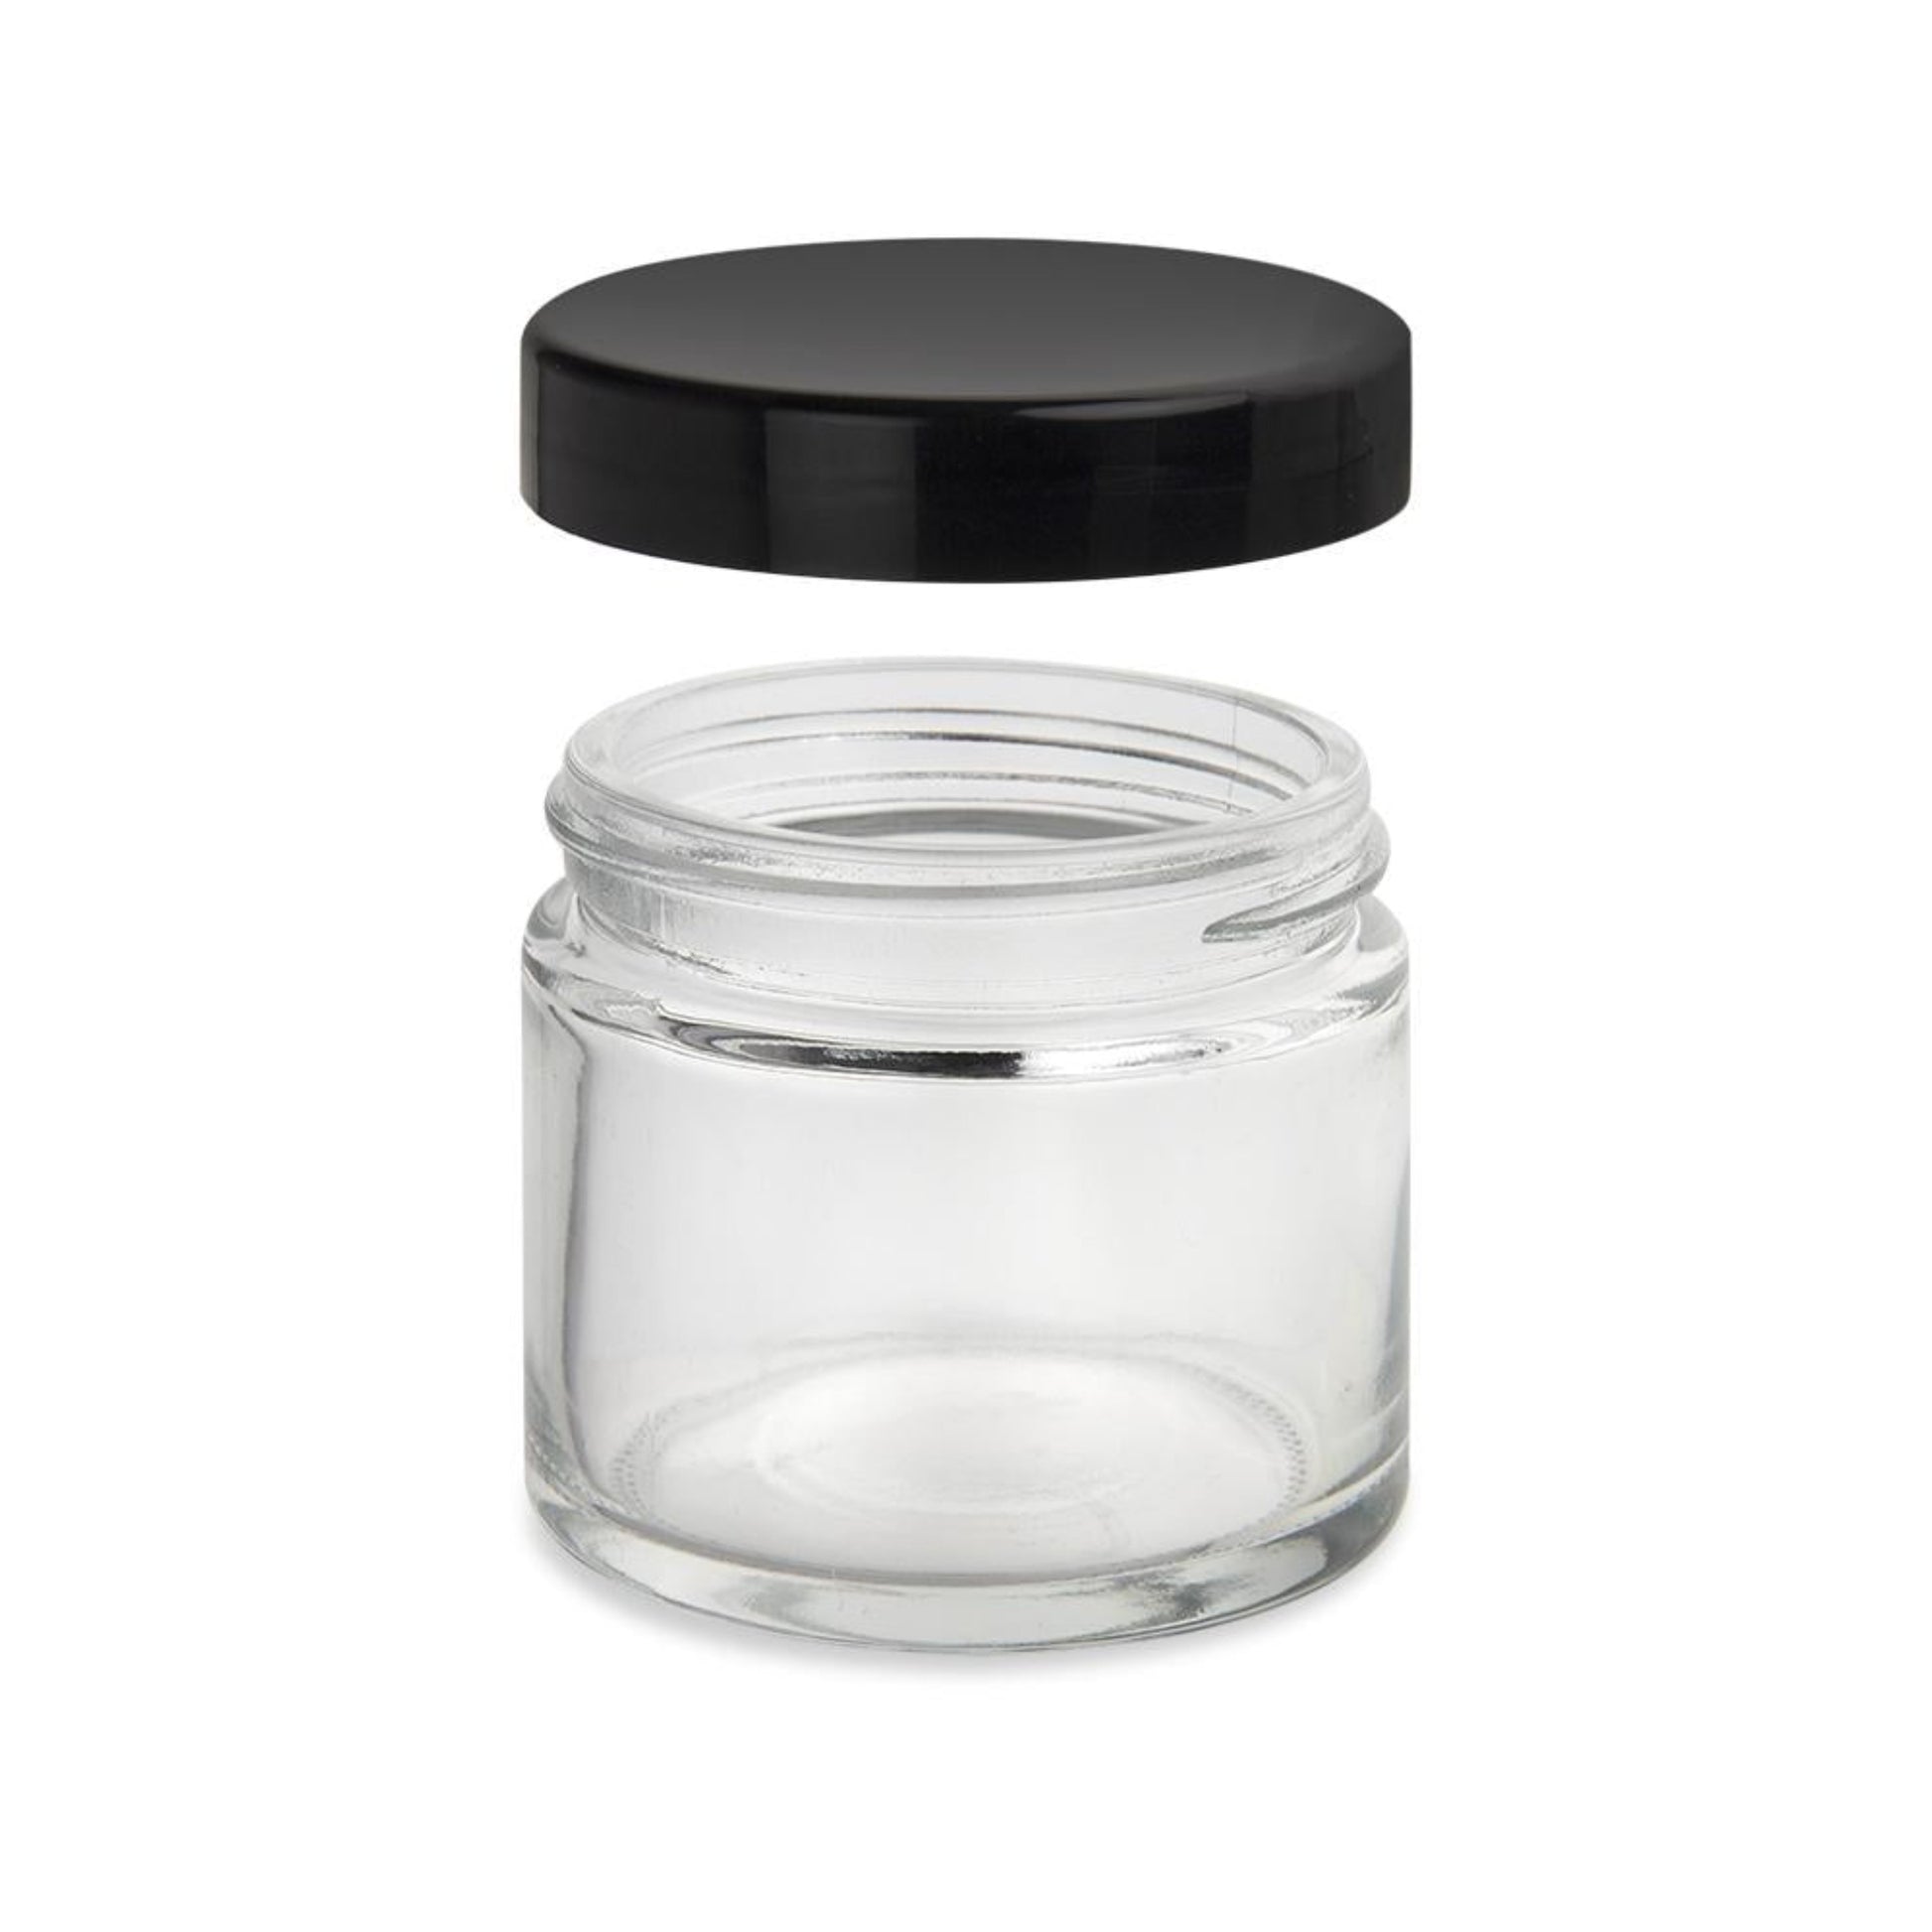 Childproof Concentrate container